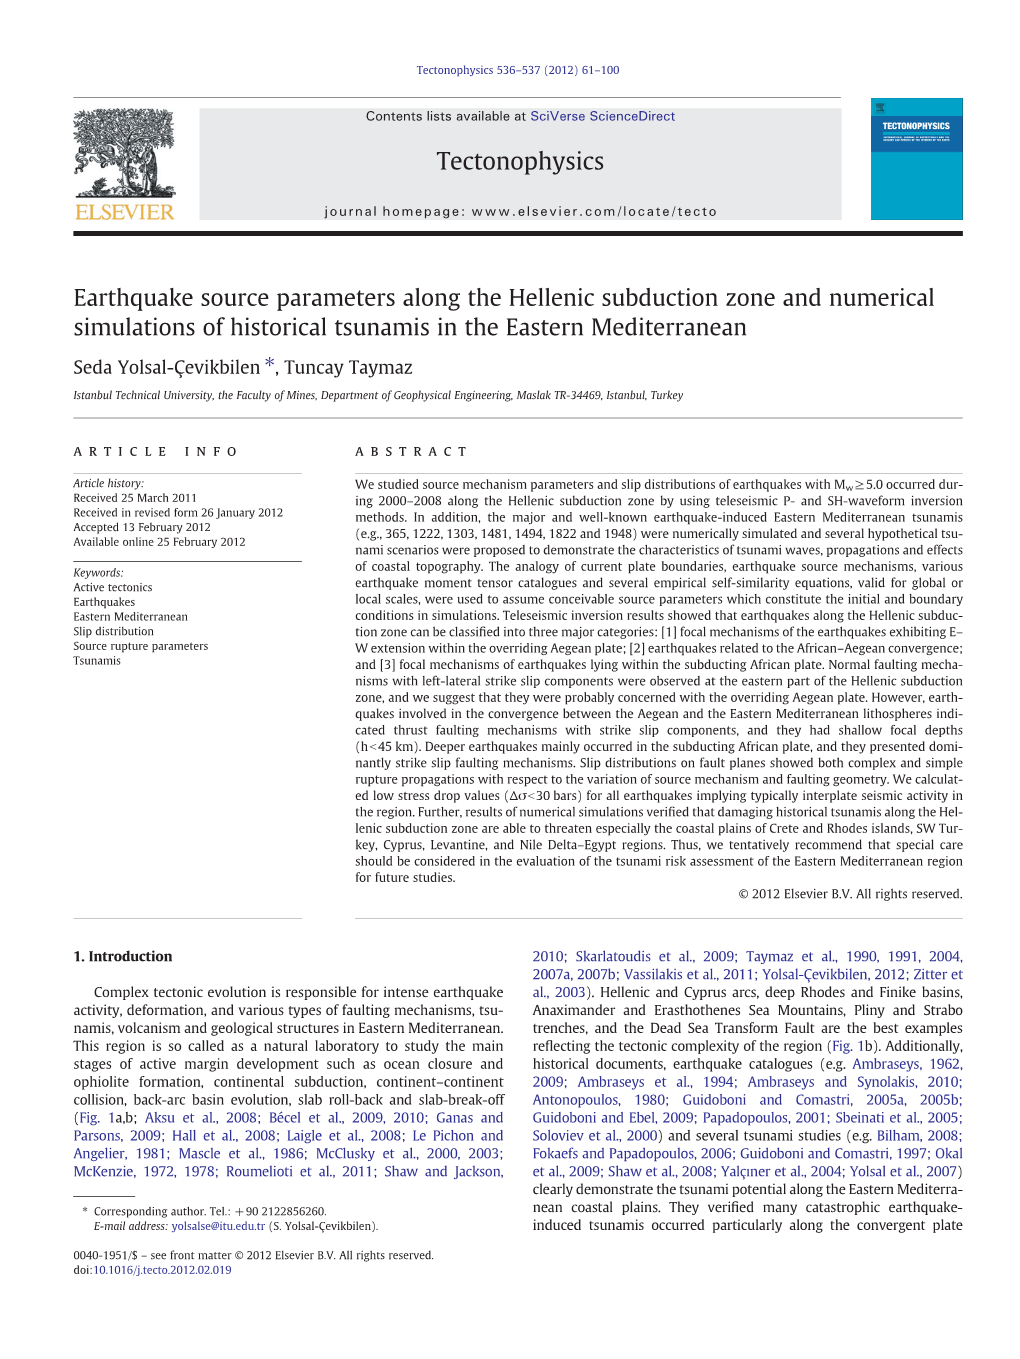 Earthquake Source Parameters Along the Hellenic Subduction Zone and Numerical Simulations of Historical Tsunamis in the Eastern Mediterranean